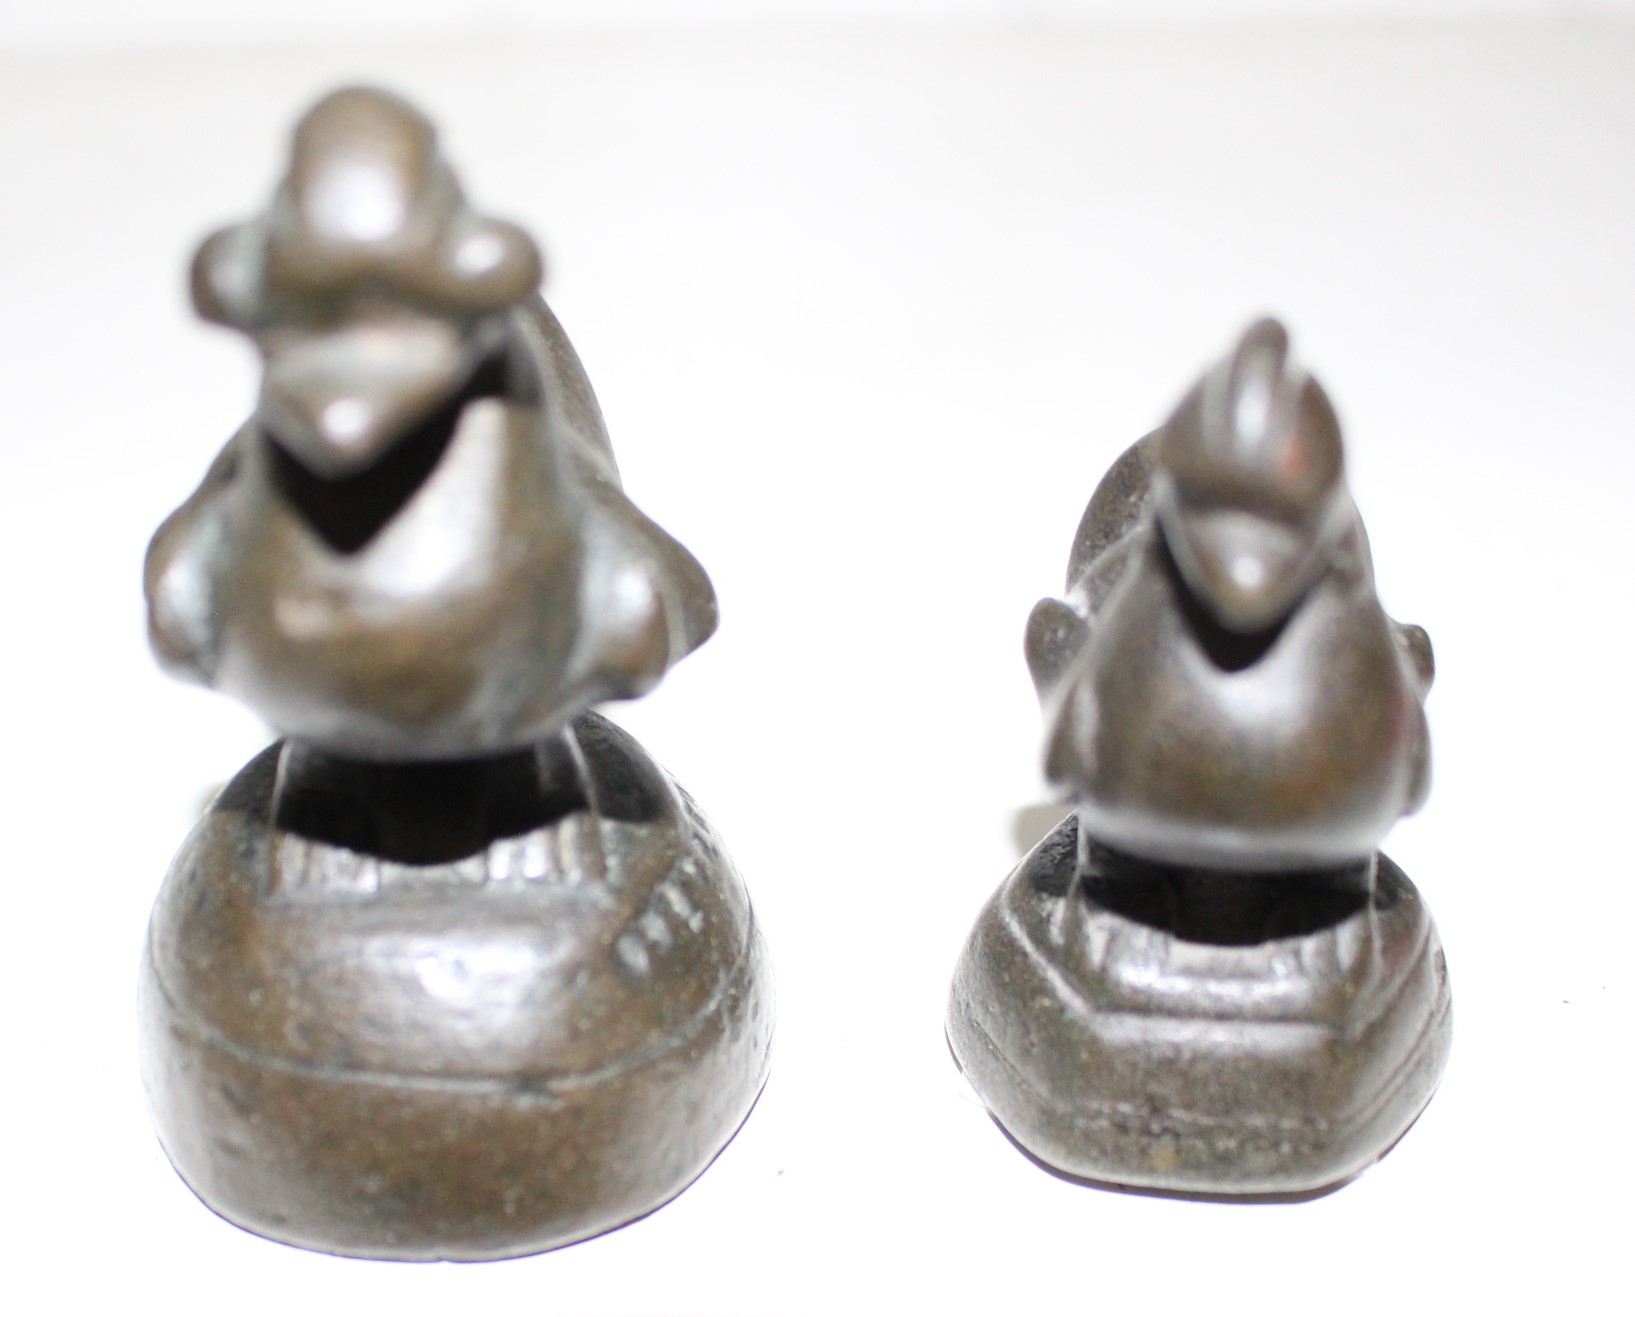 Two Burmese bronze opium weights in sizes, 6.5cm high